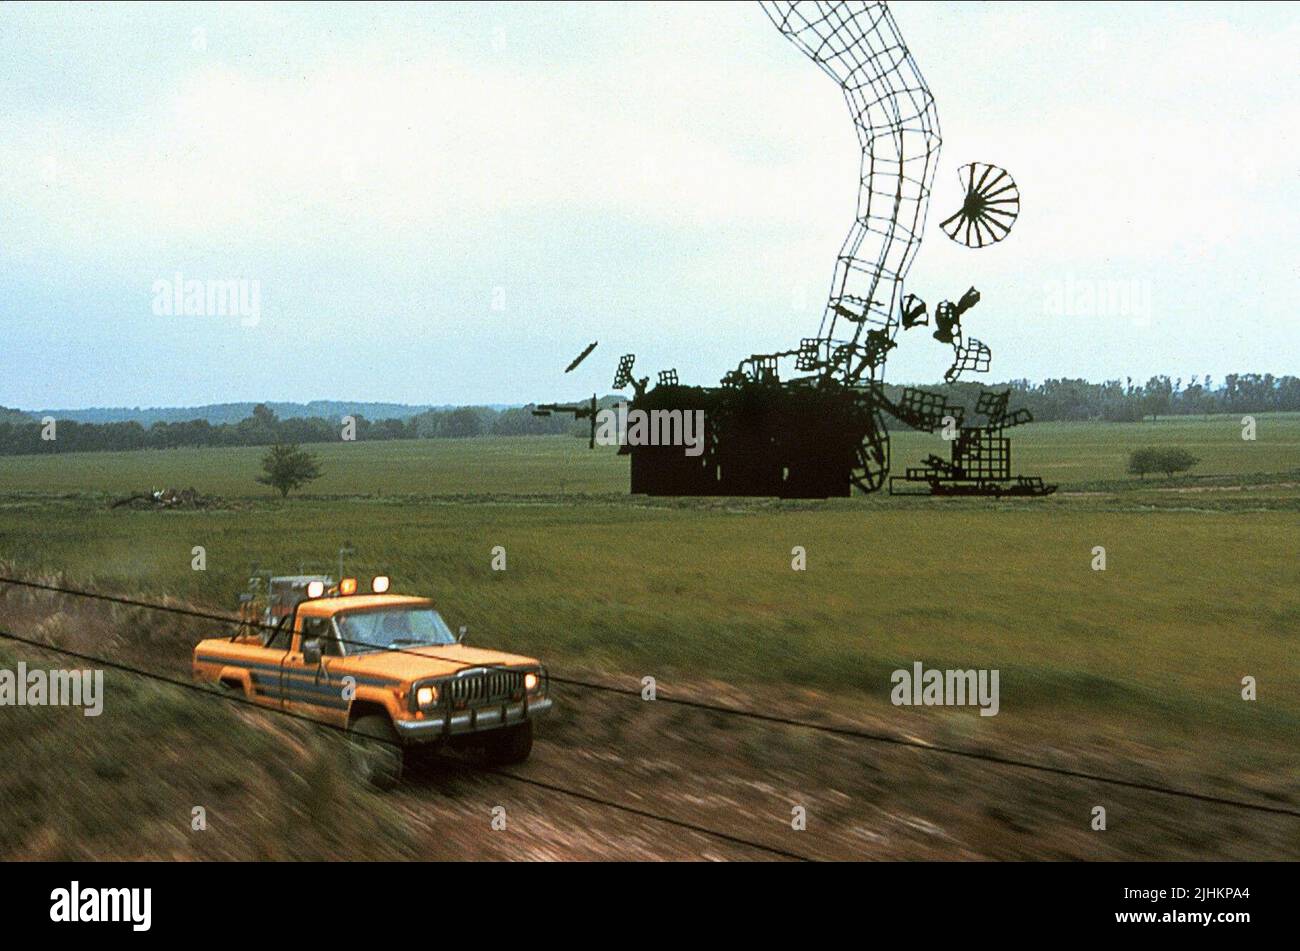 VISUAL EFFECTS (CGI) JEEP IN FIELD SCENE 3 OF 3, TWISTER, 1996 Stock Photo